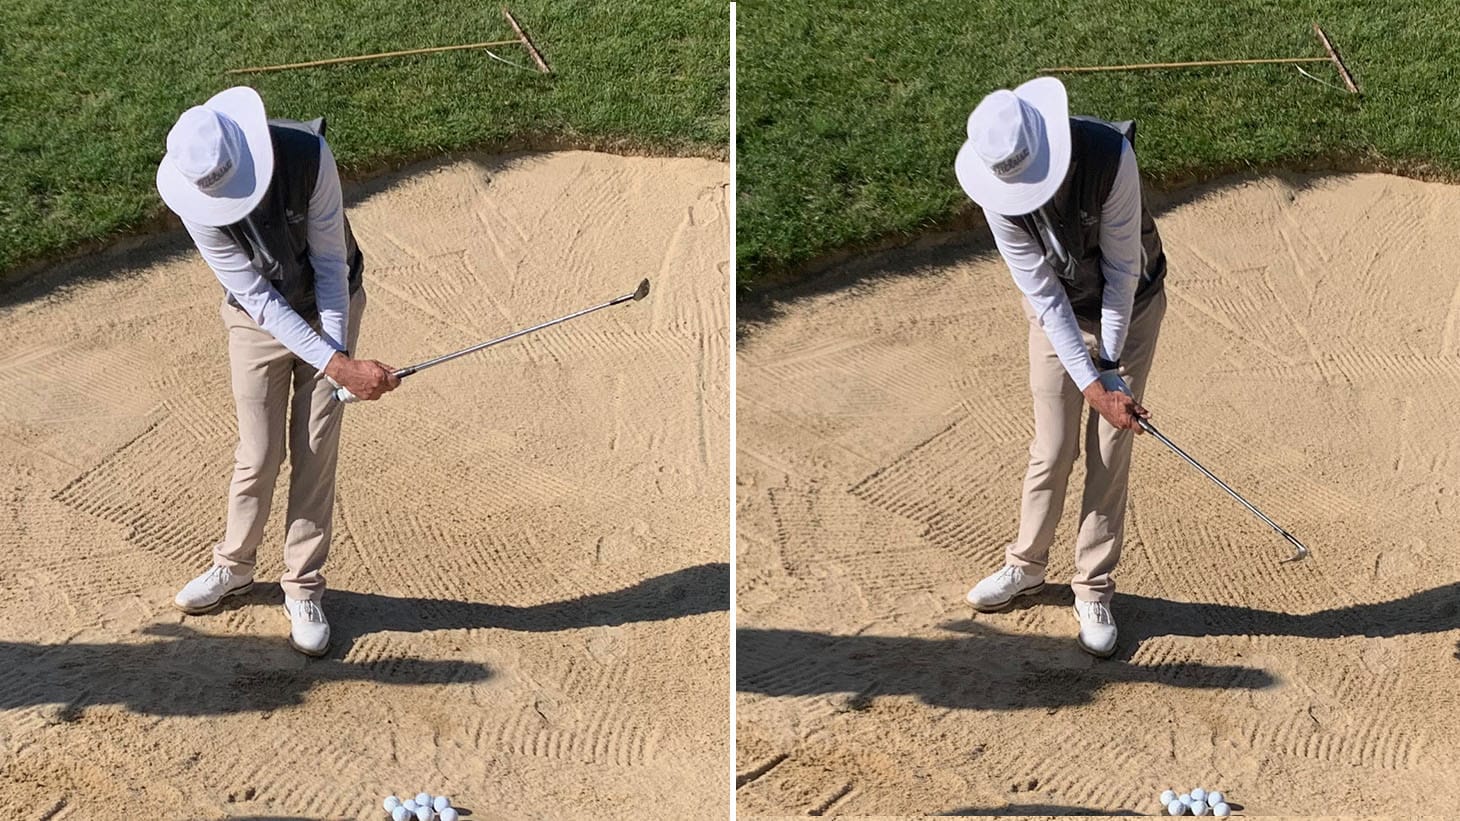 Another important fundamental of bunker play is...